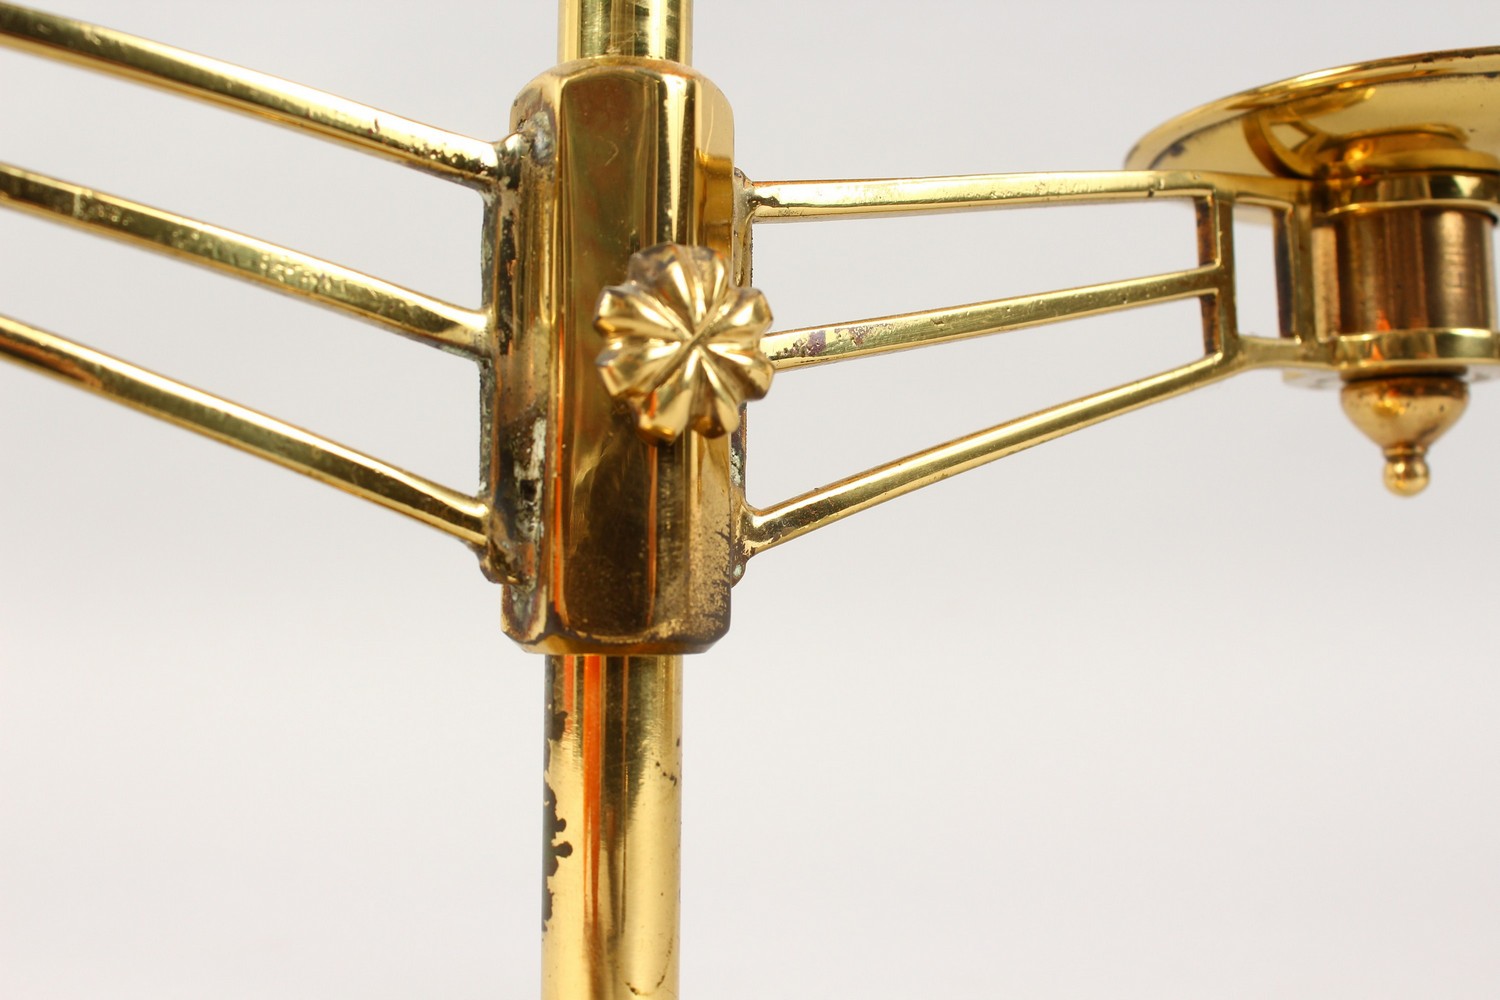 A MODERN BRASS TWO-LIGHT CANDLESTICK, with orange glass shades. 15.5ins high. - Image 5 of 5